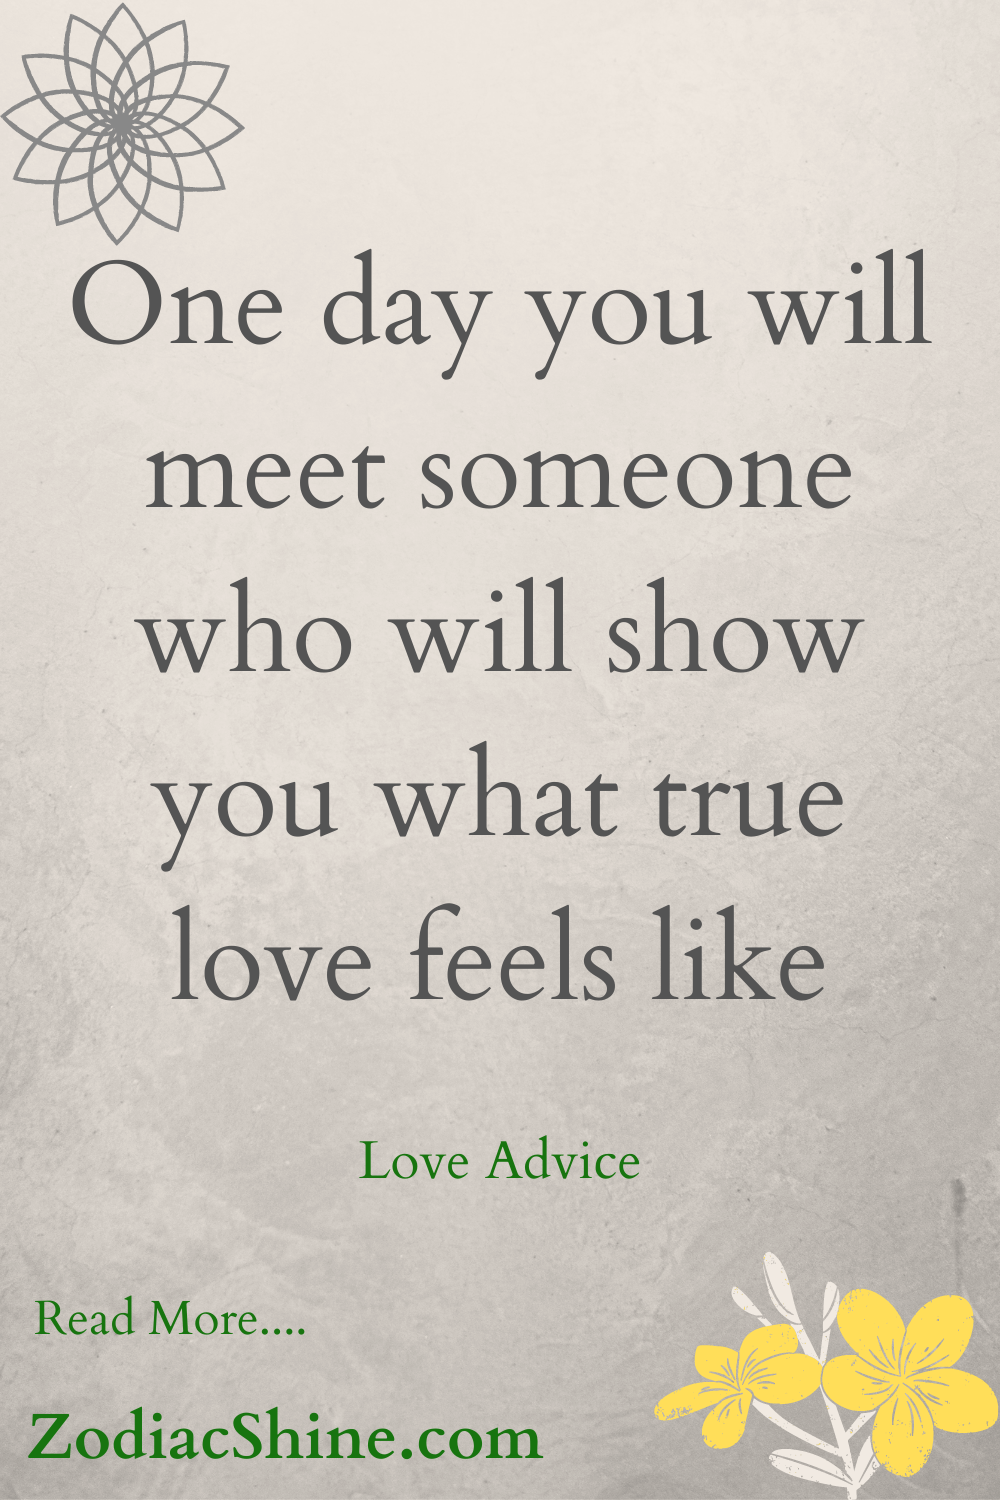 One day you will meet someone who will show you what true love feels like